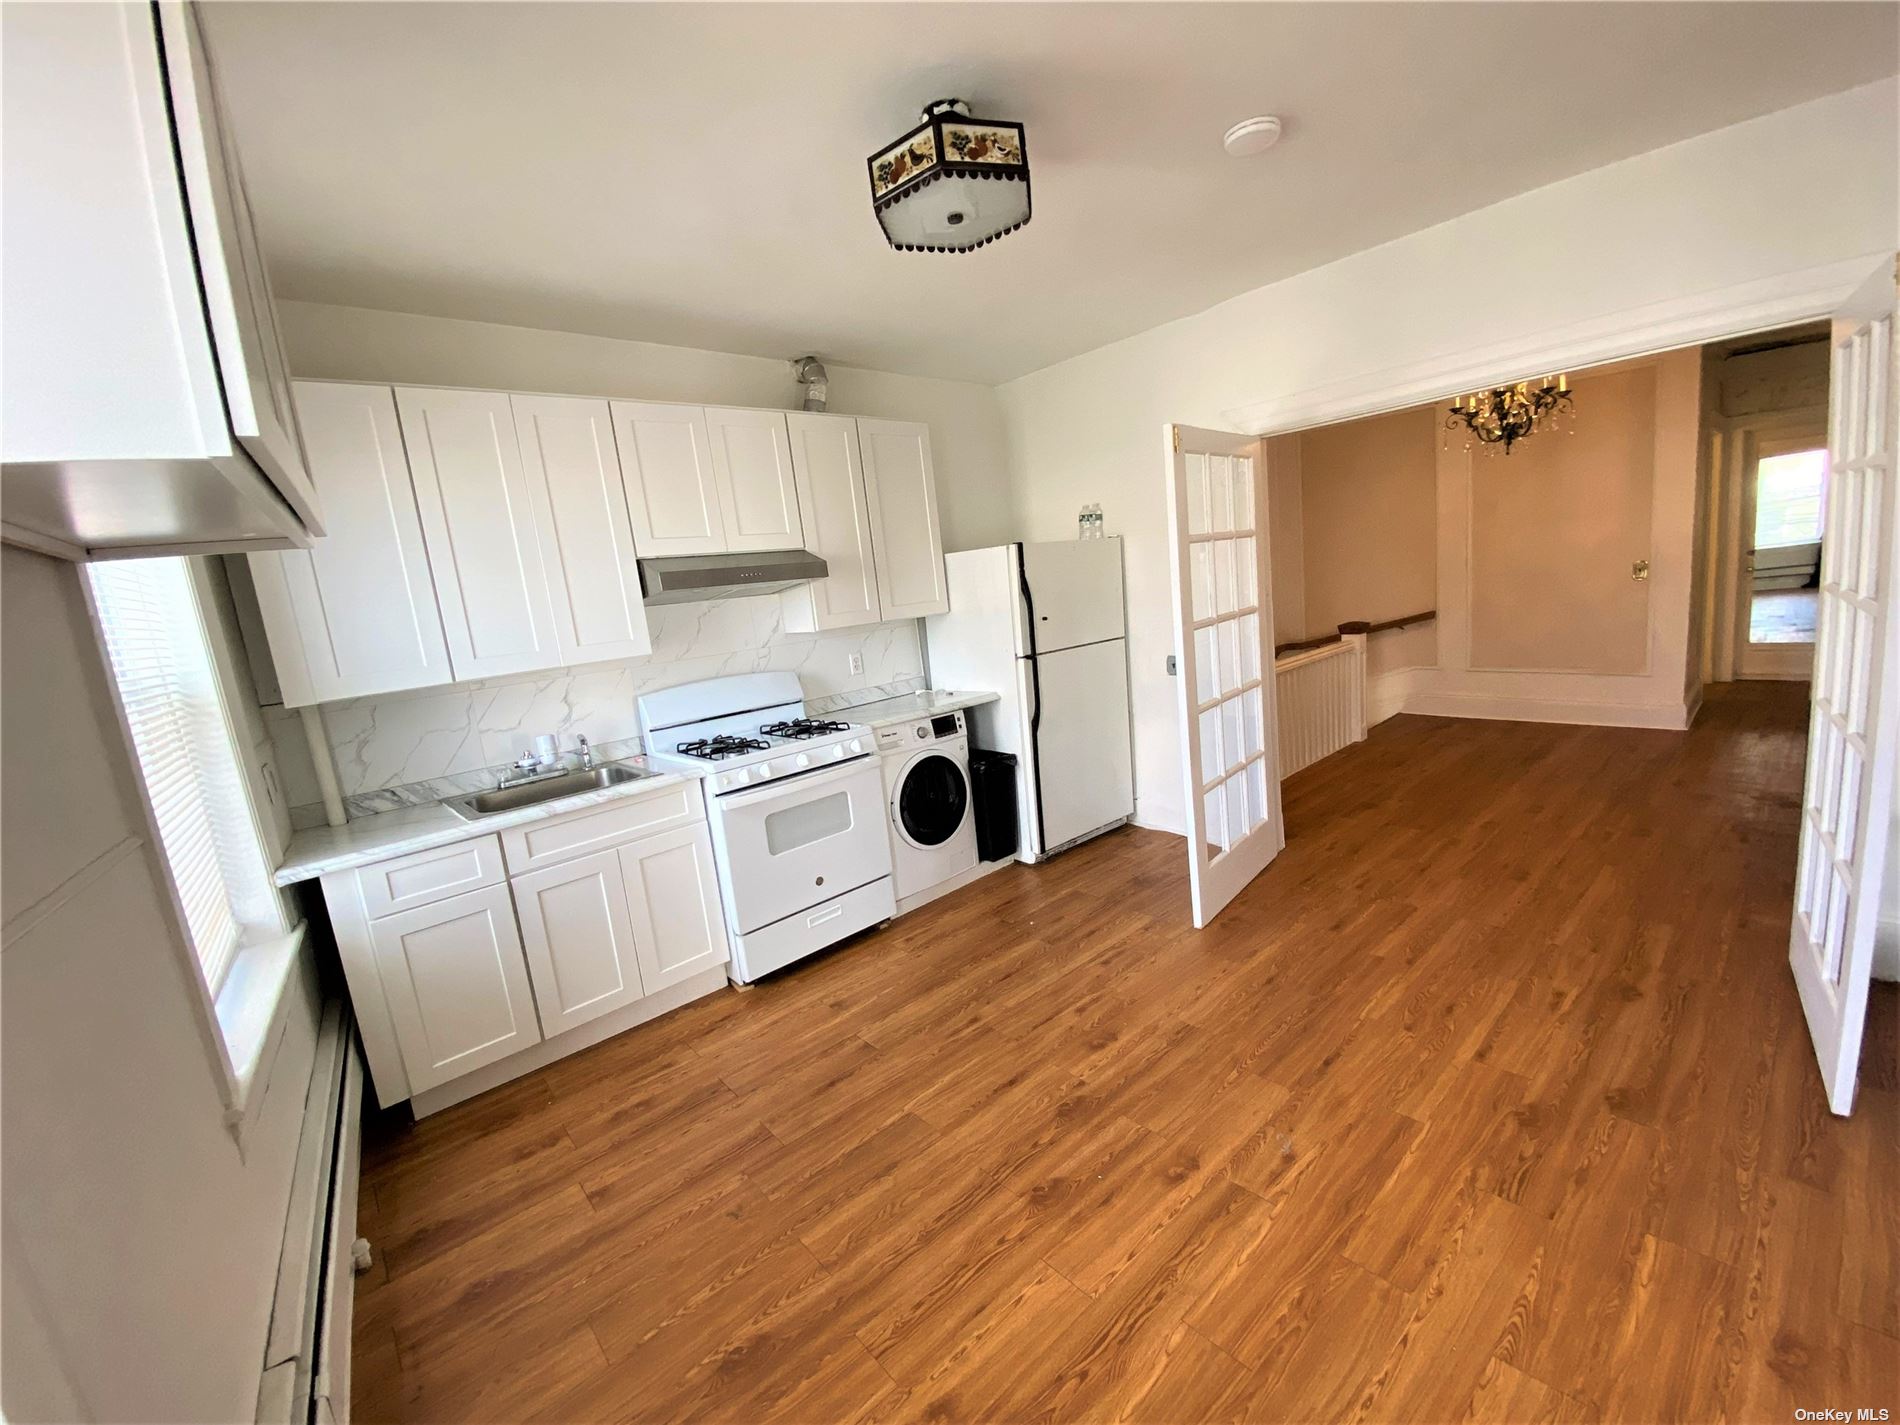 a kitchen with wooden floors and white appliances